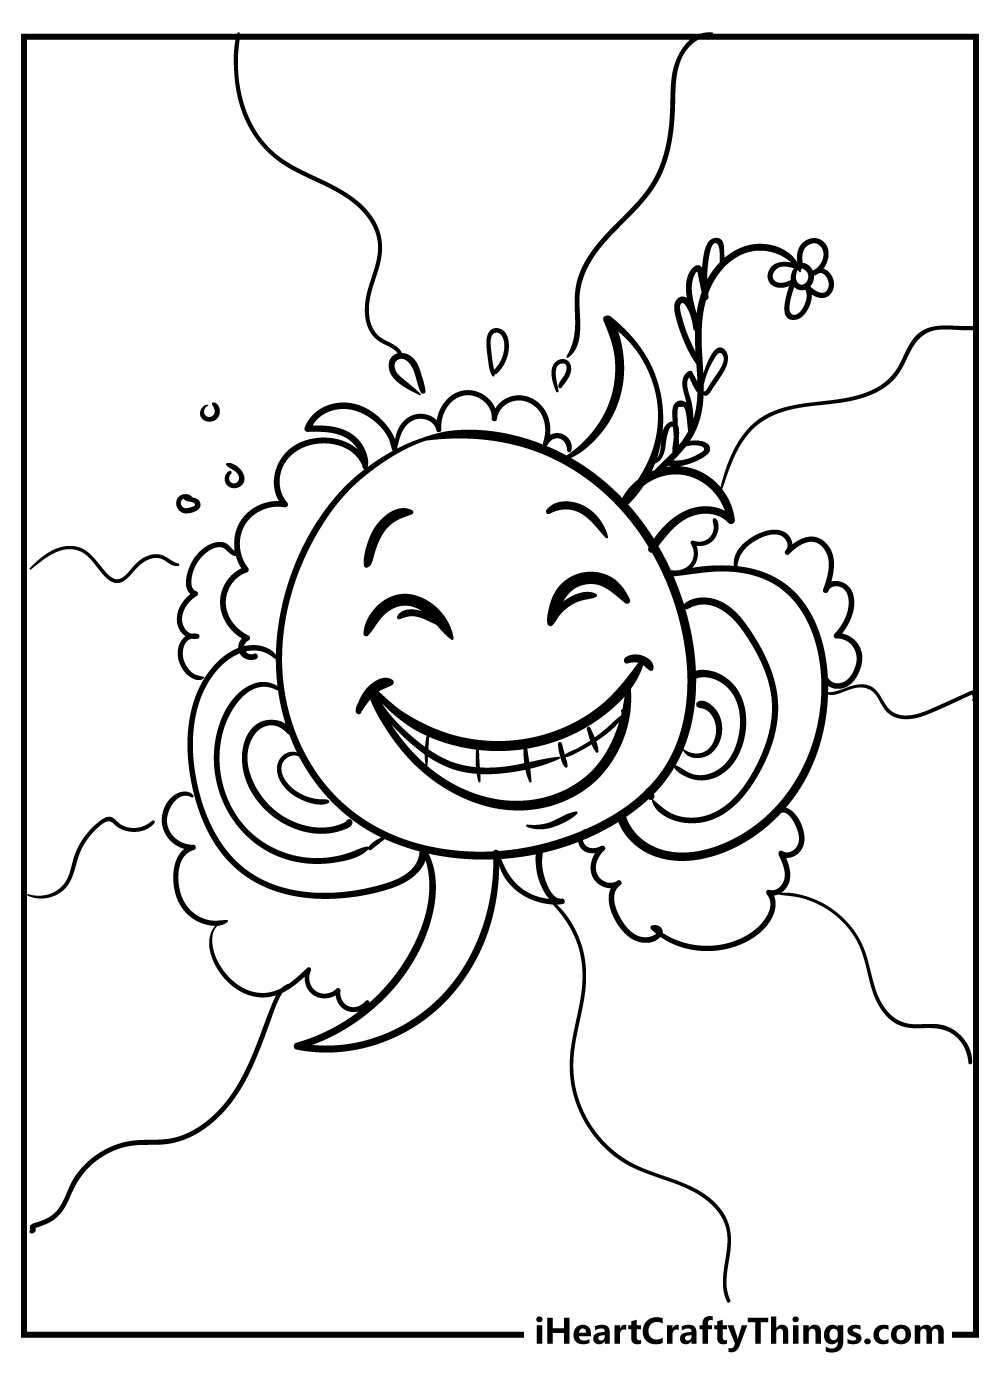 Happy coloring pages free printables